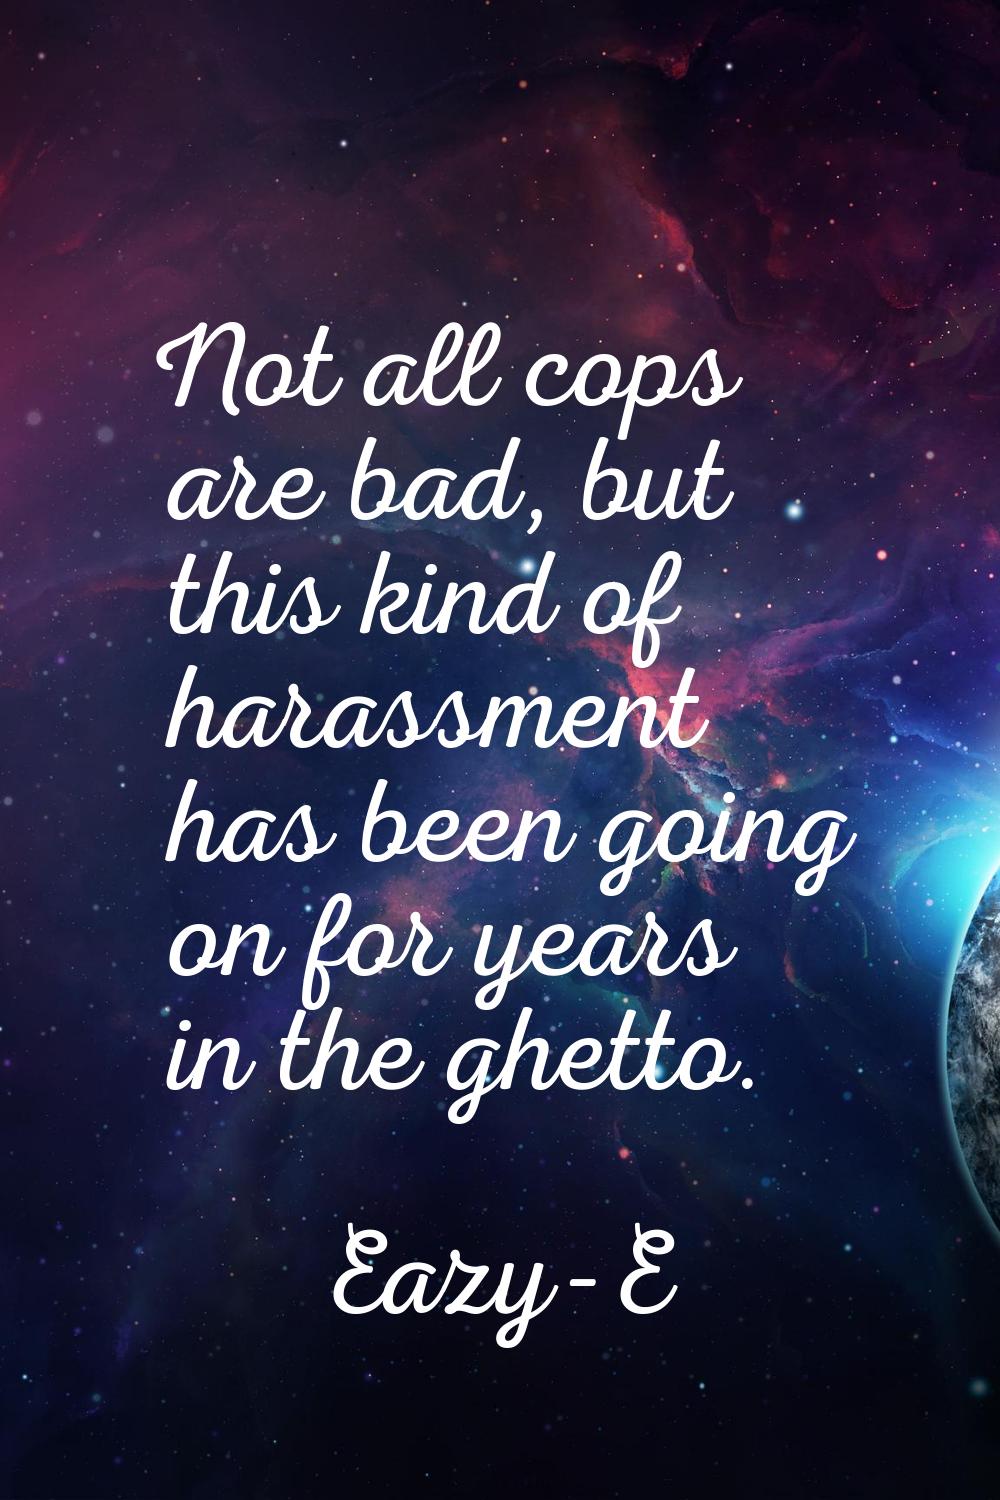 Not all cops are bad, but this kind of harassment has been going on for years in the ghetto.